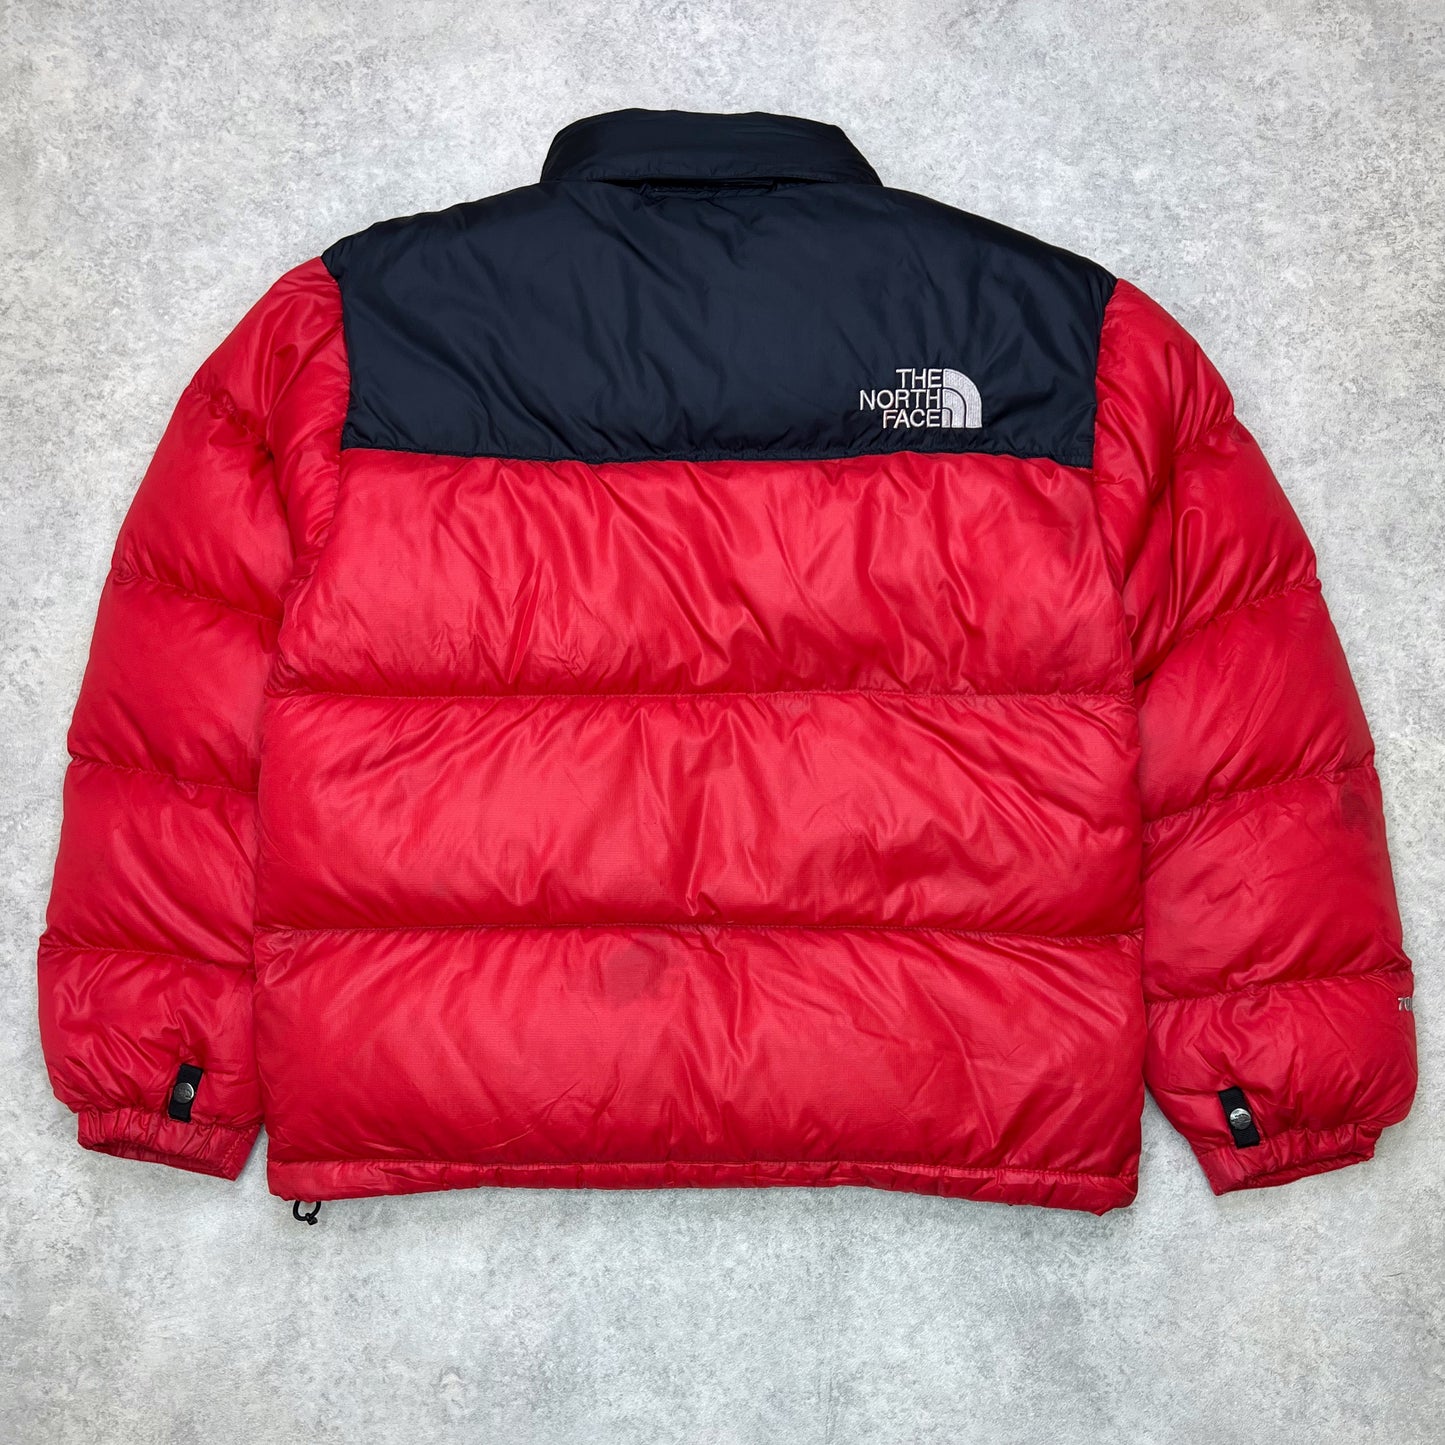 North Face Nuptse (Men’s S) Red Puffer